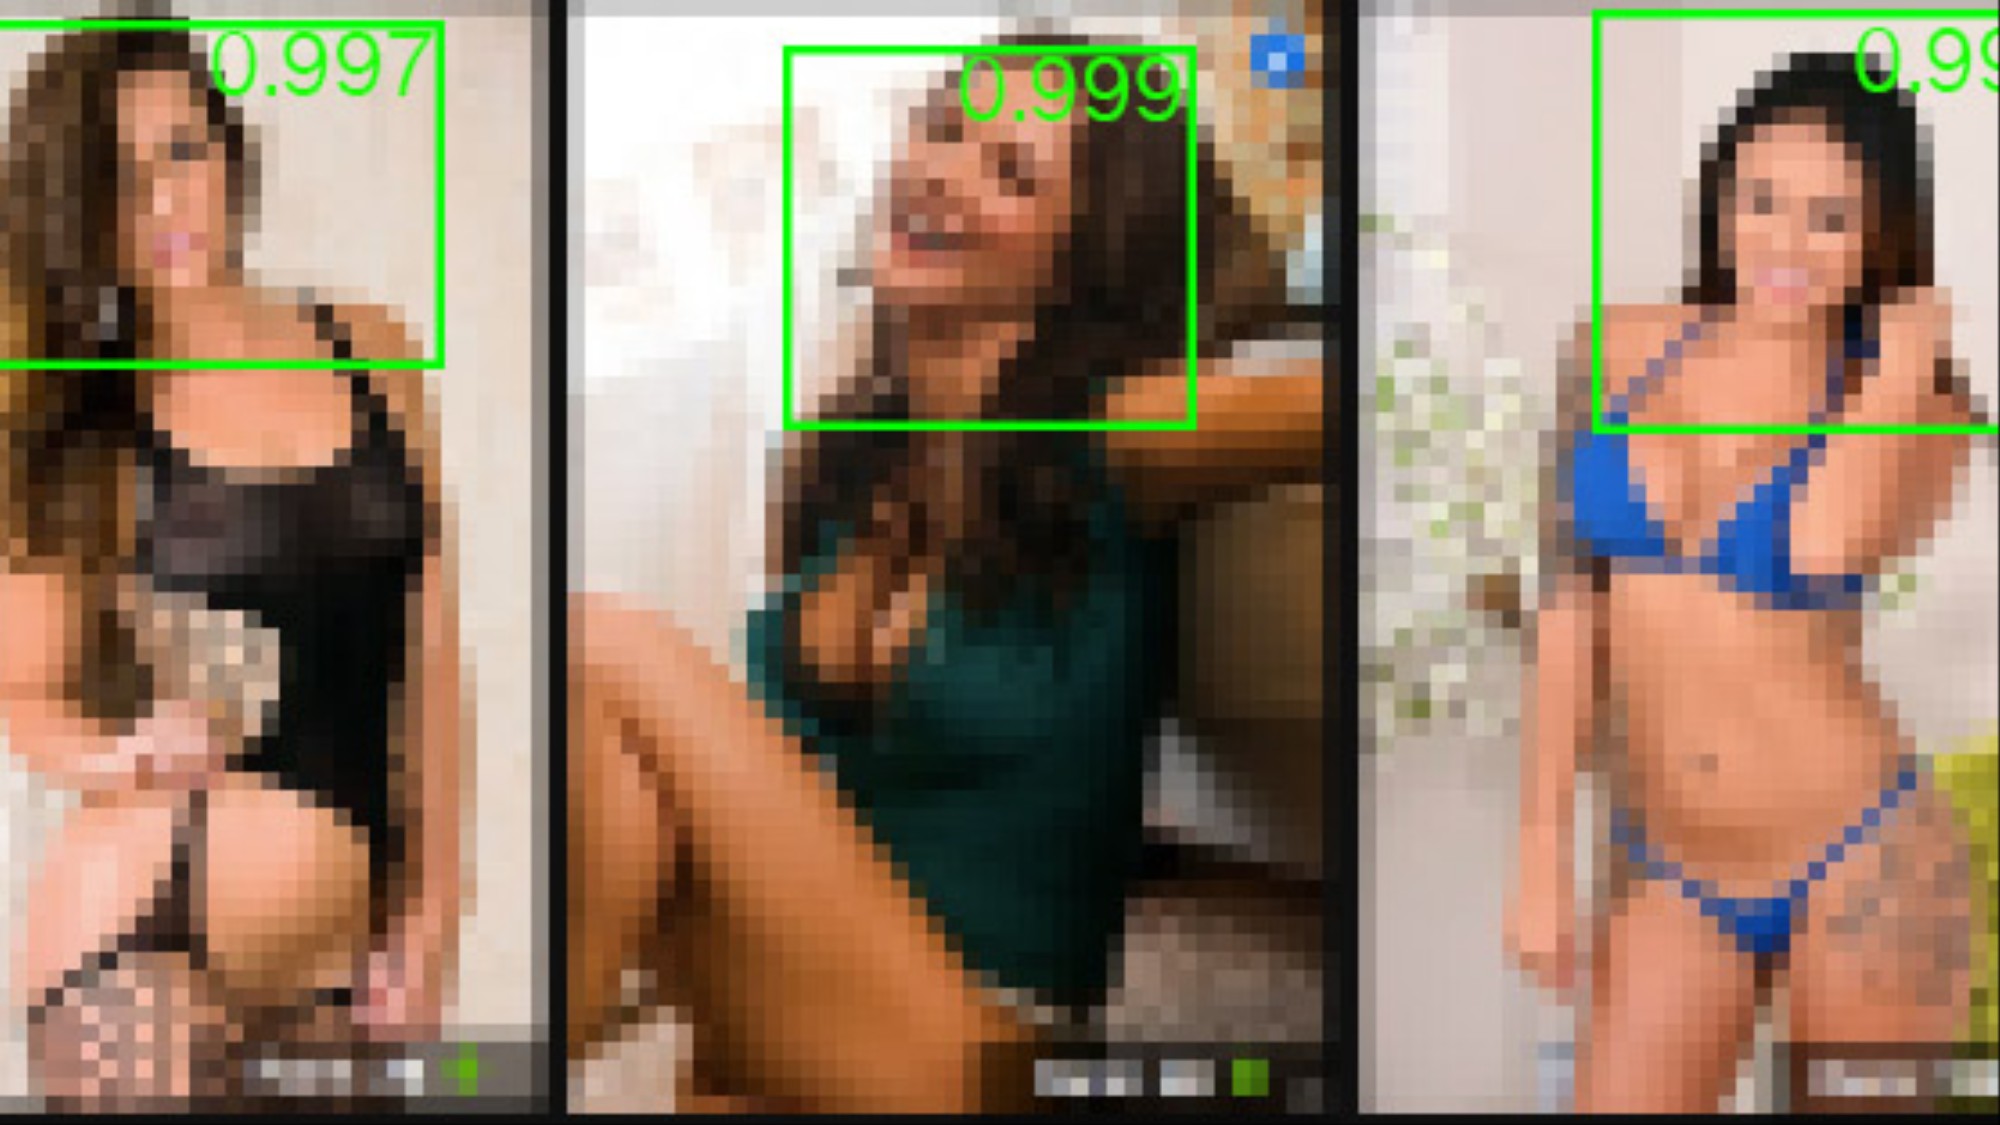 Best Facial Porn Stars - Facial Recognition for Porn Stars Is a Privacy Nightmare ...